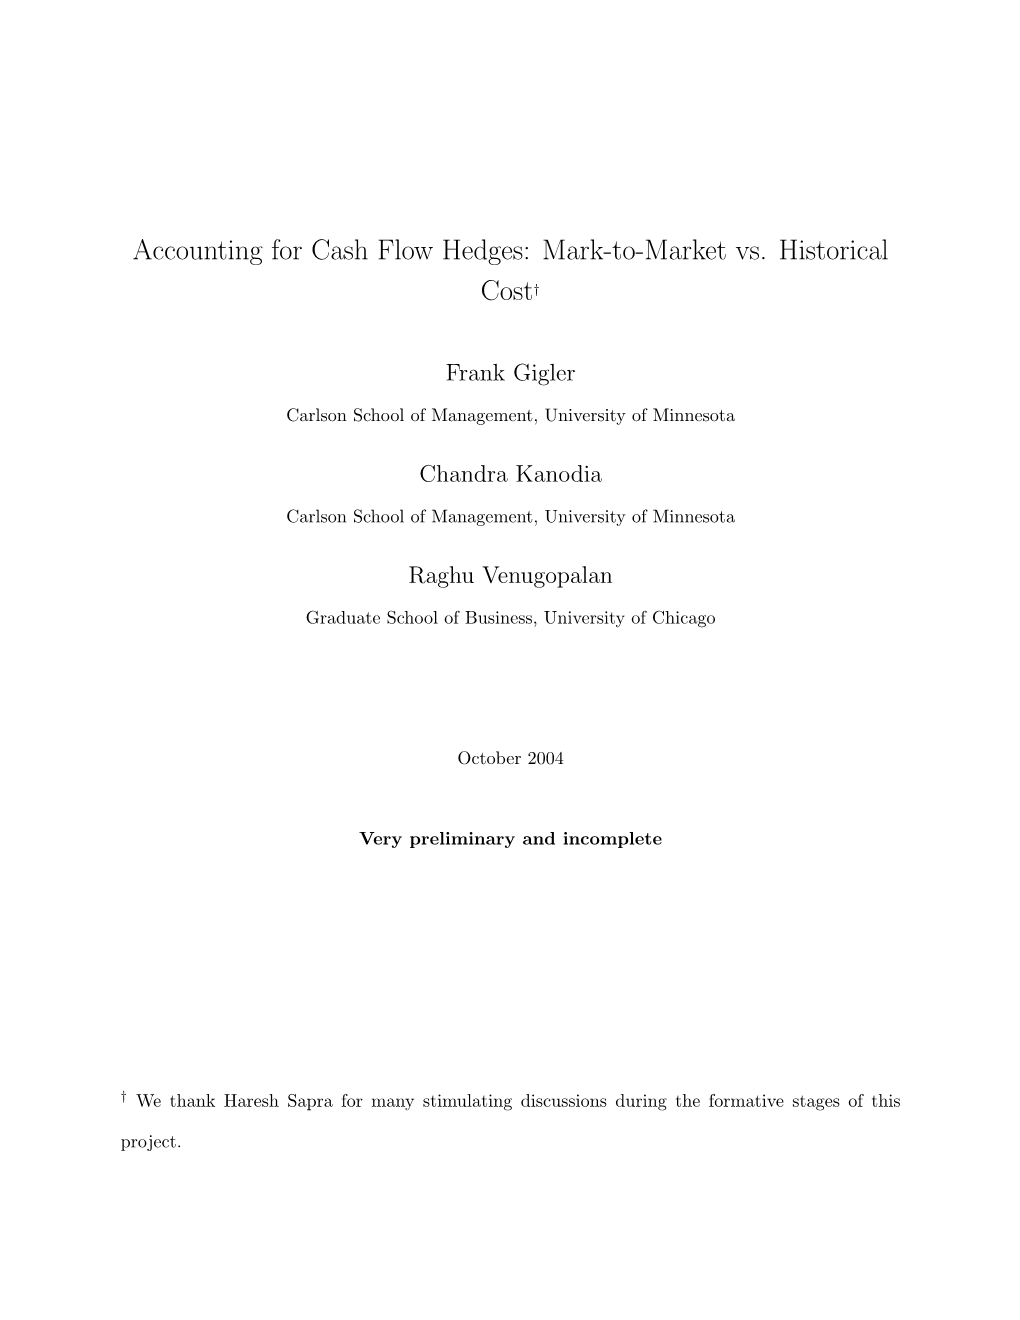 Accounting for Cash Flow Hedges: Mark-To-Market Vs. Historical Cost†